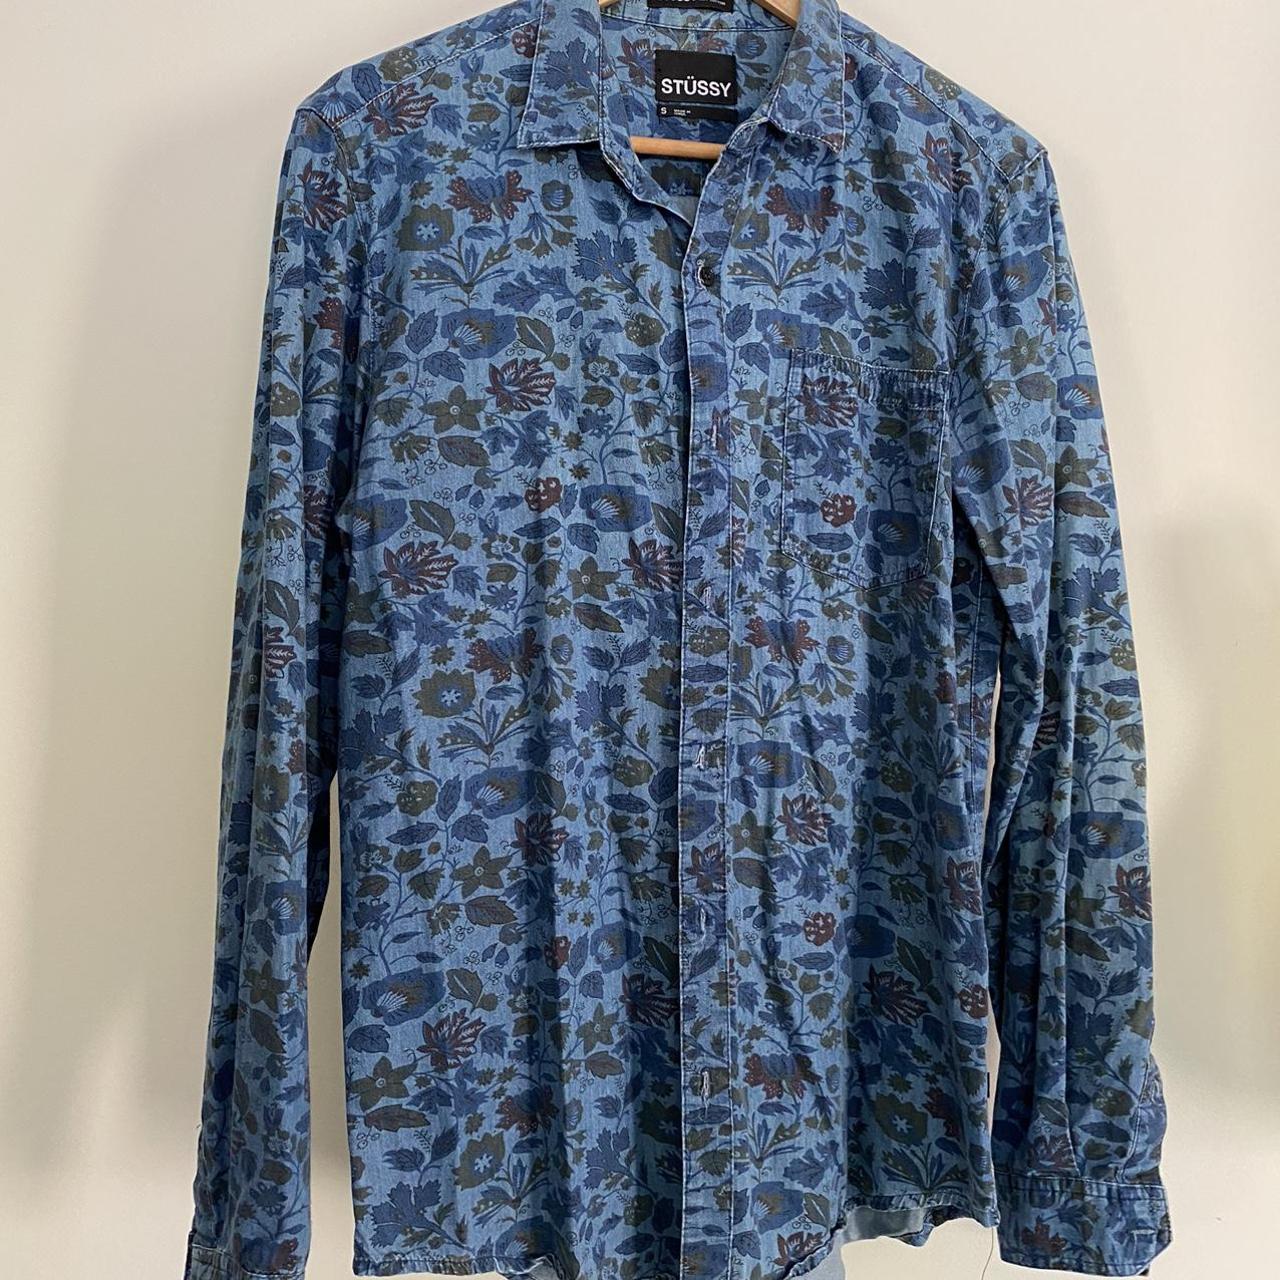 Stussy 100% cotton shirt with floral print size... - Depop